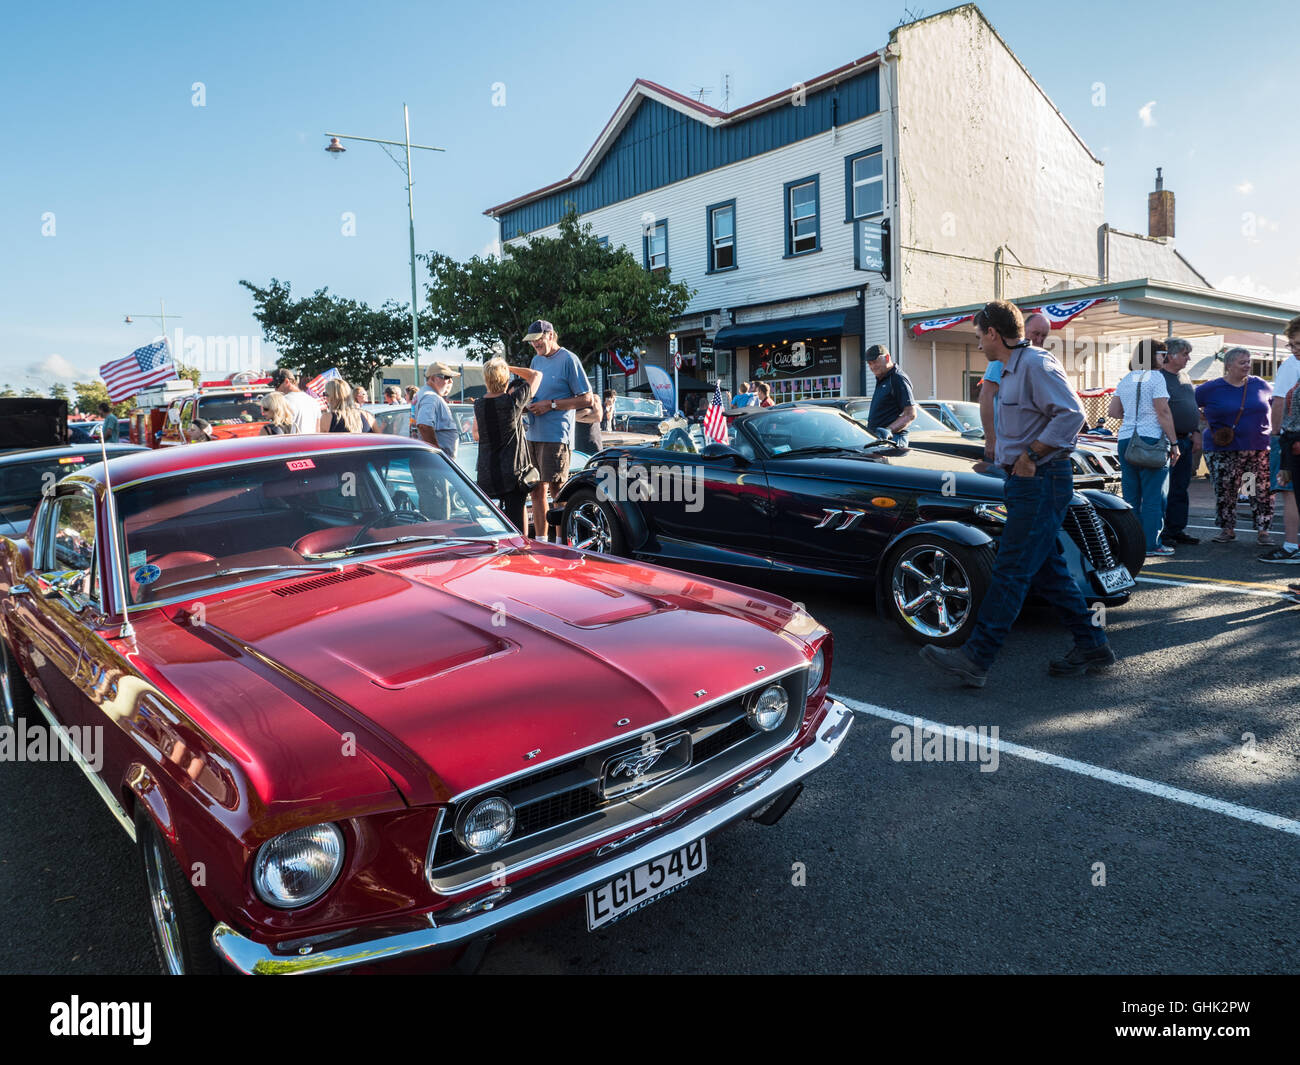 Ford Mustang and a Chrysler Prowler American cars at Americarna Classic Car Show, Inglewood, New Zealand. Stock Photo